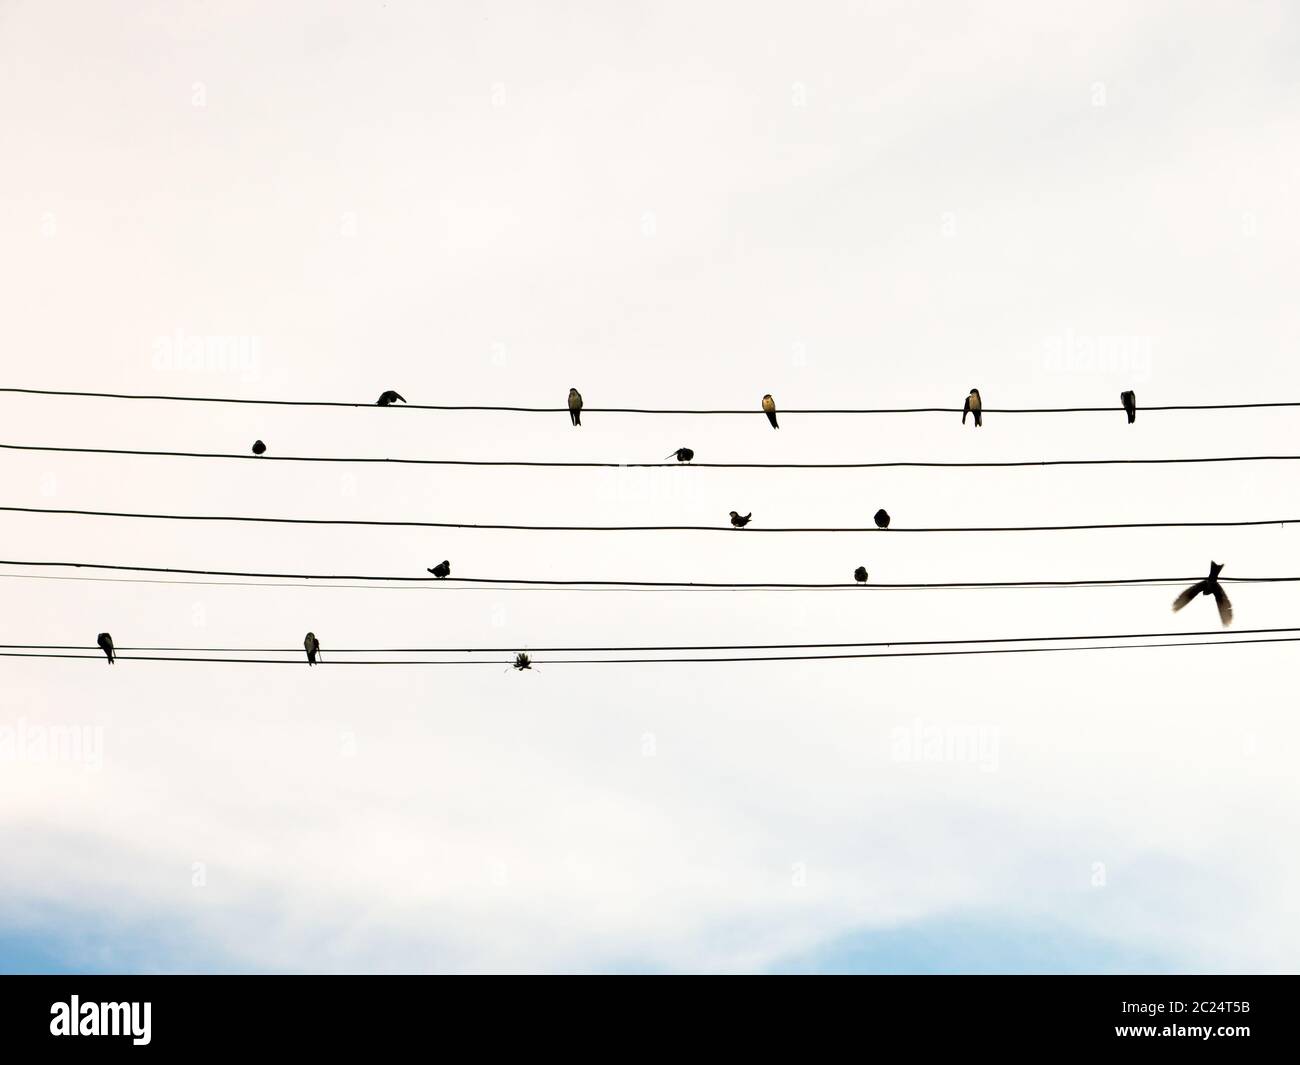 Swallows in electric wire likes musical score or guitar cords Stock Photo